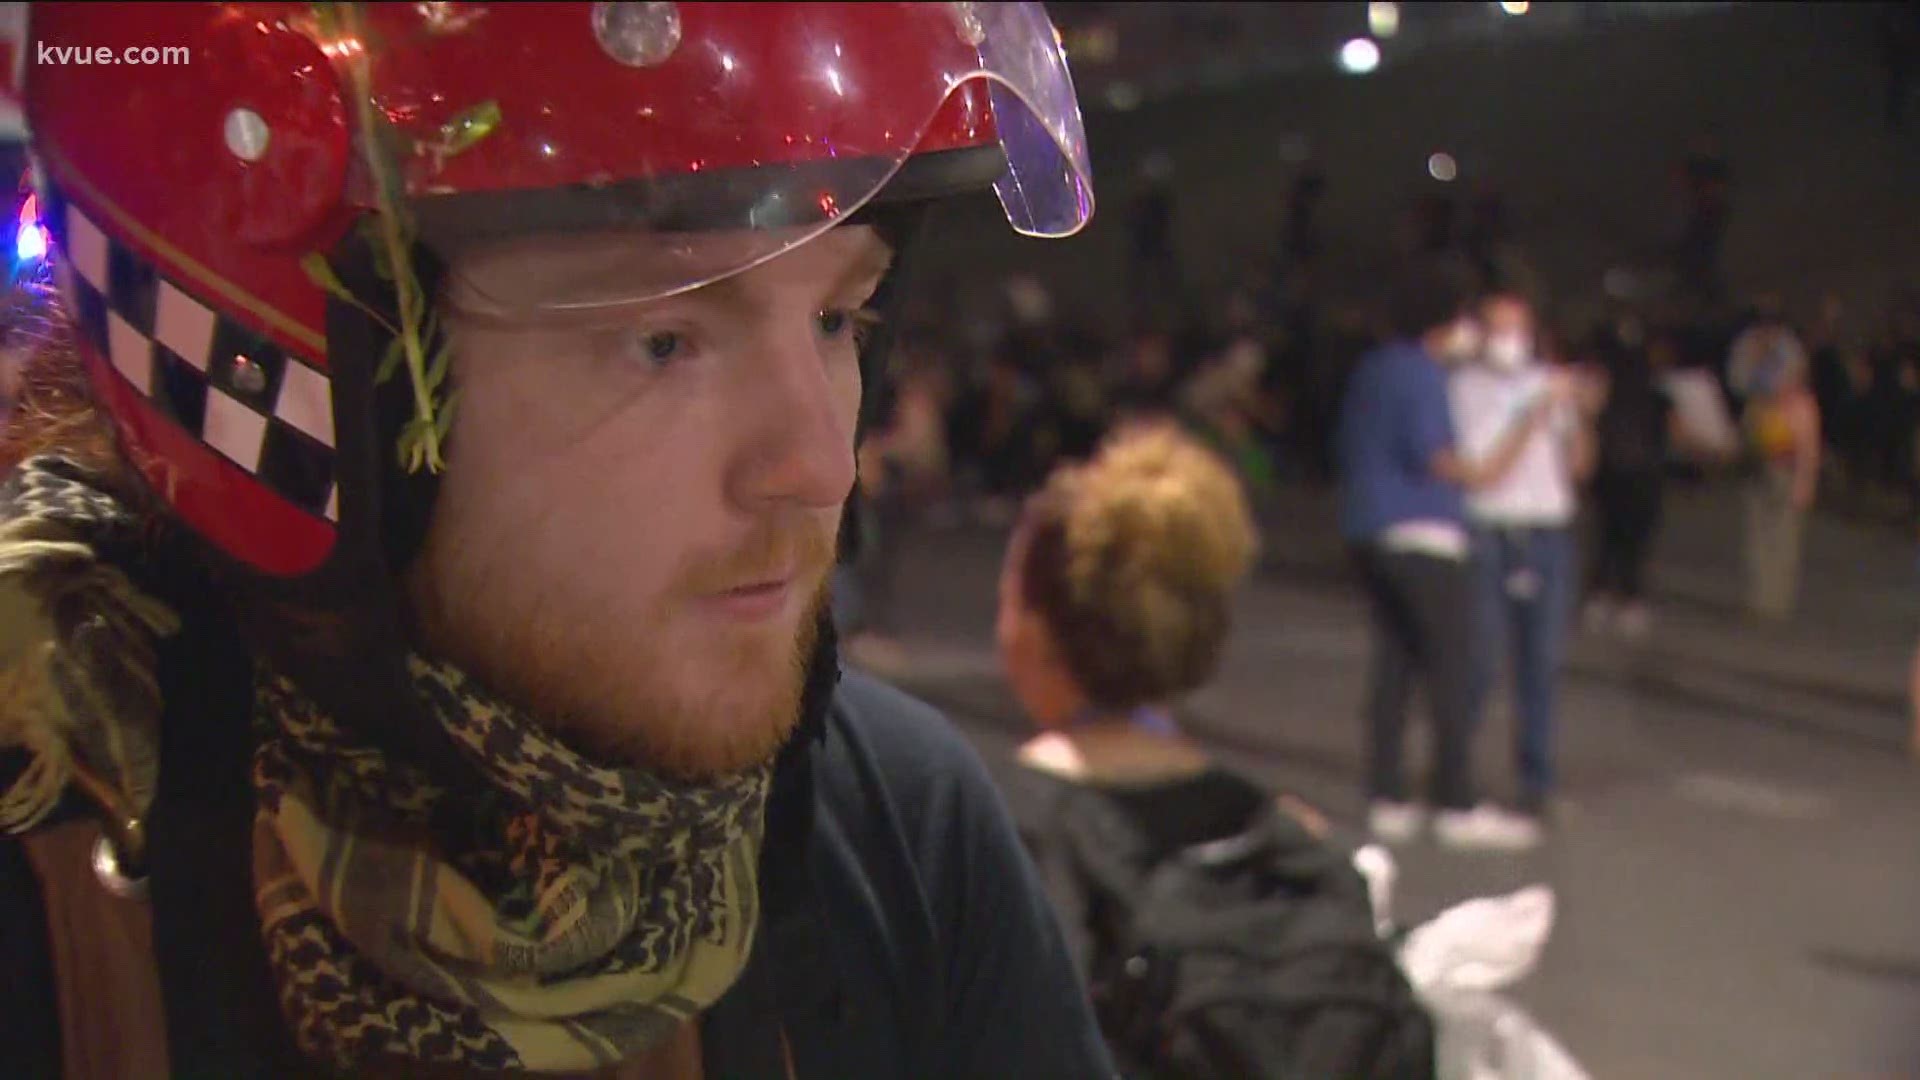 An Austin protester spoke with KVUE's Bryce Newberry on Thursday night.